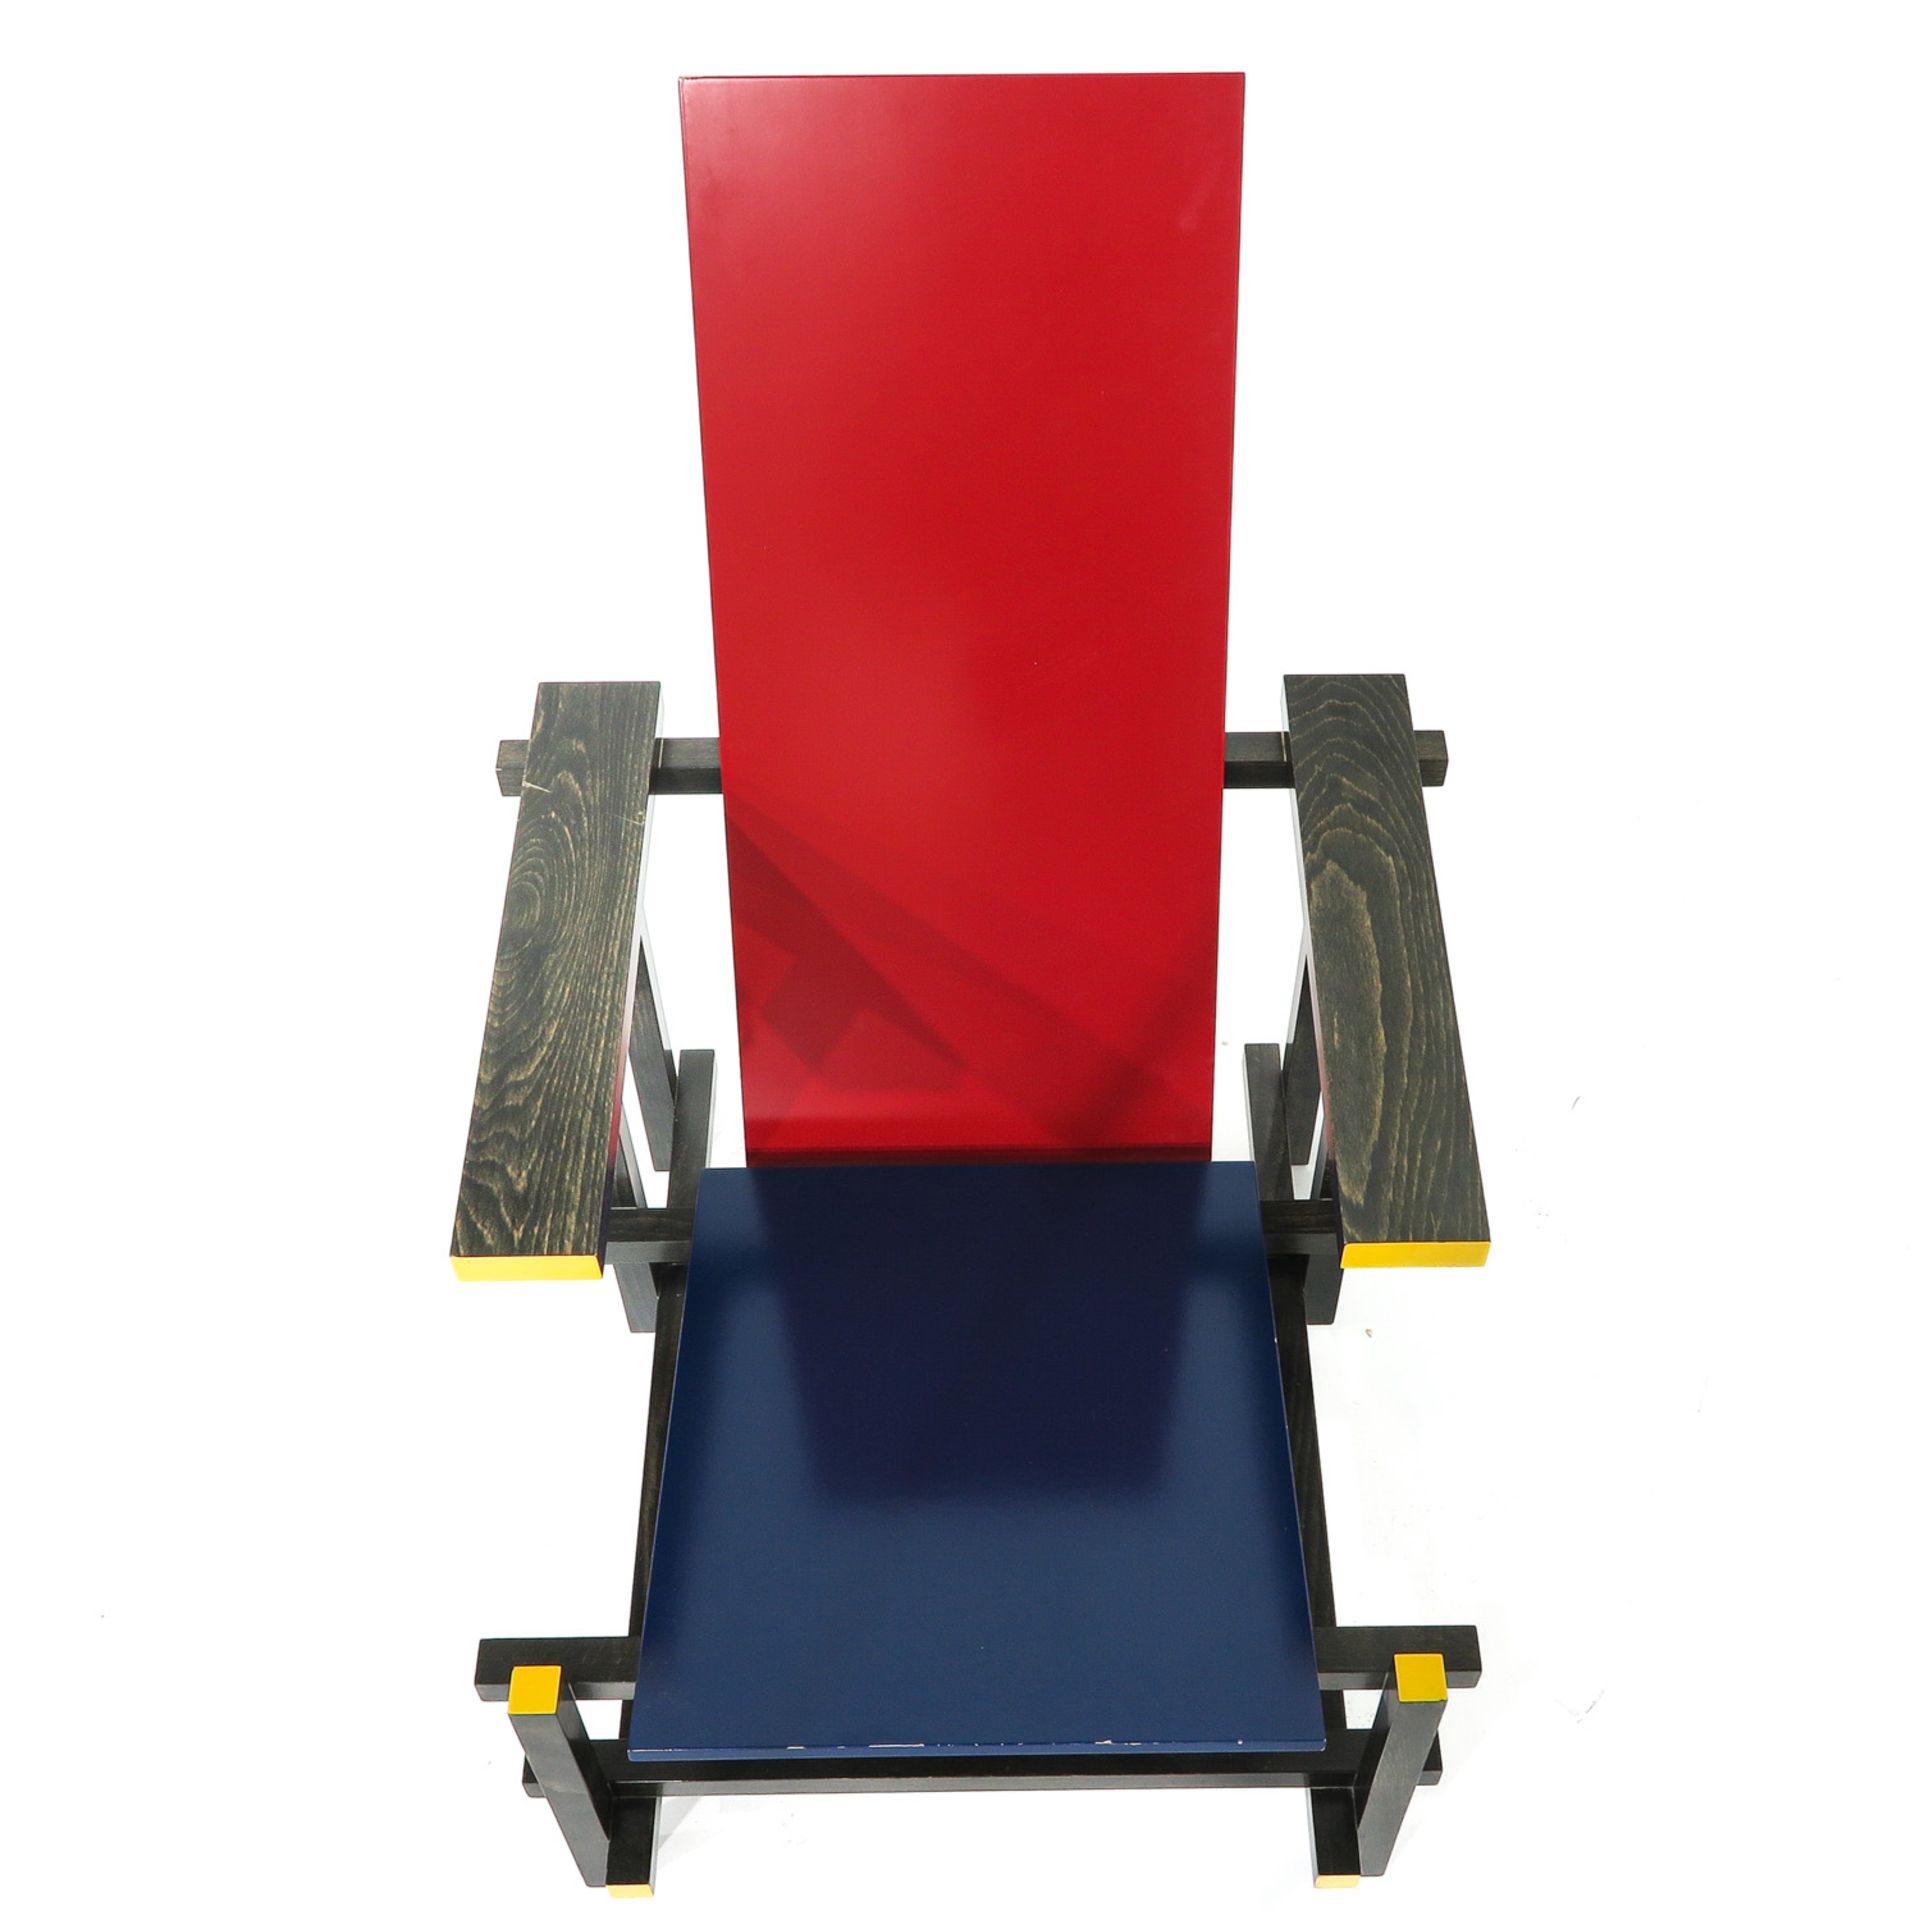 A Gerrit Rietveld Fauteuil - Image 5 of 10